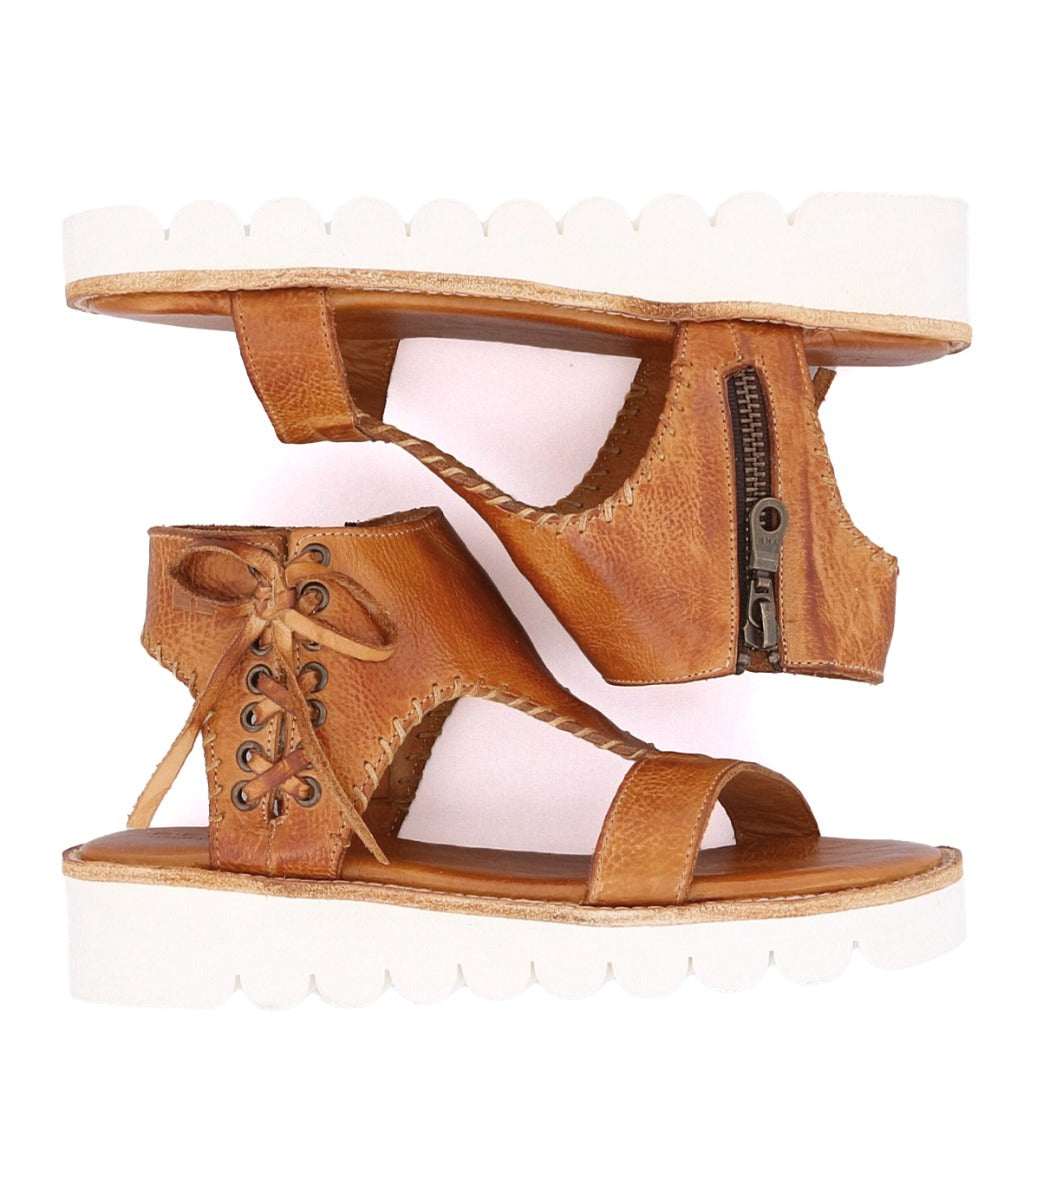 A pair of Zoe II tan leather sandals with zippers by Bed Stu.